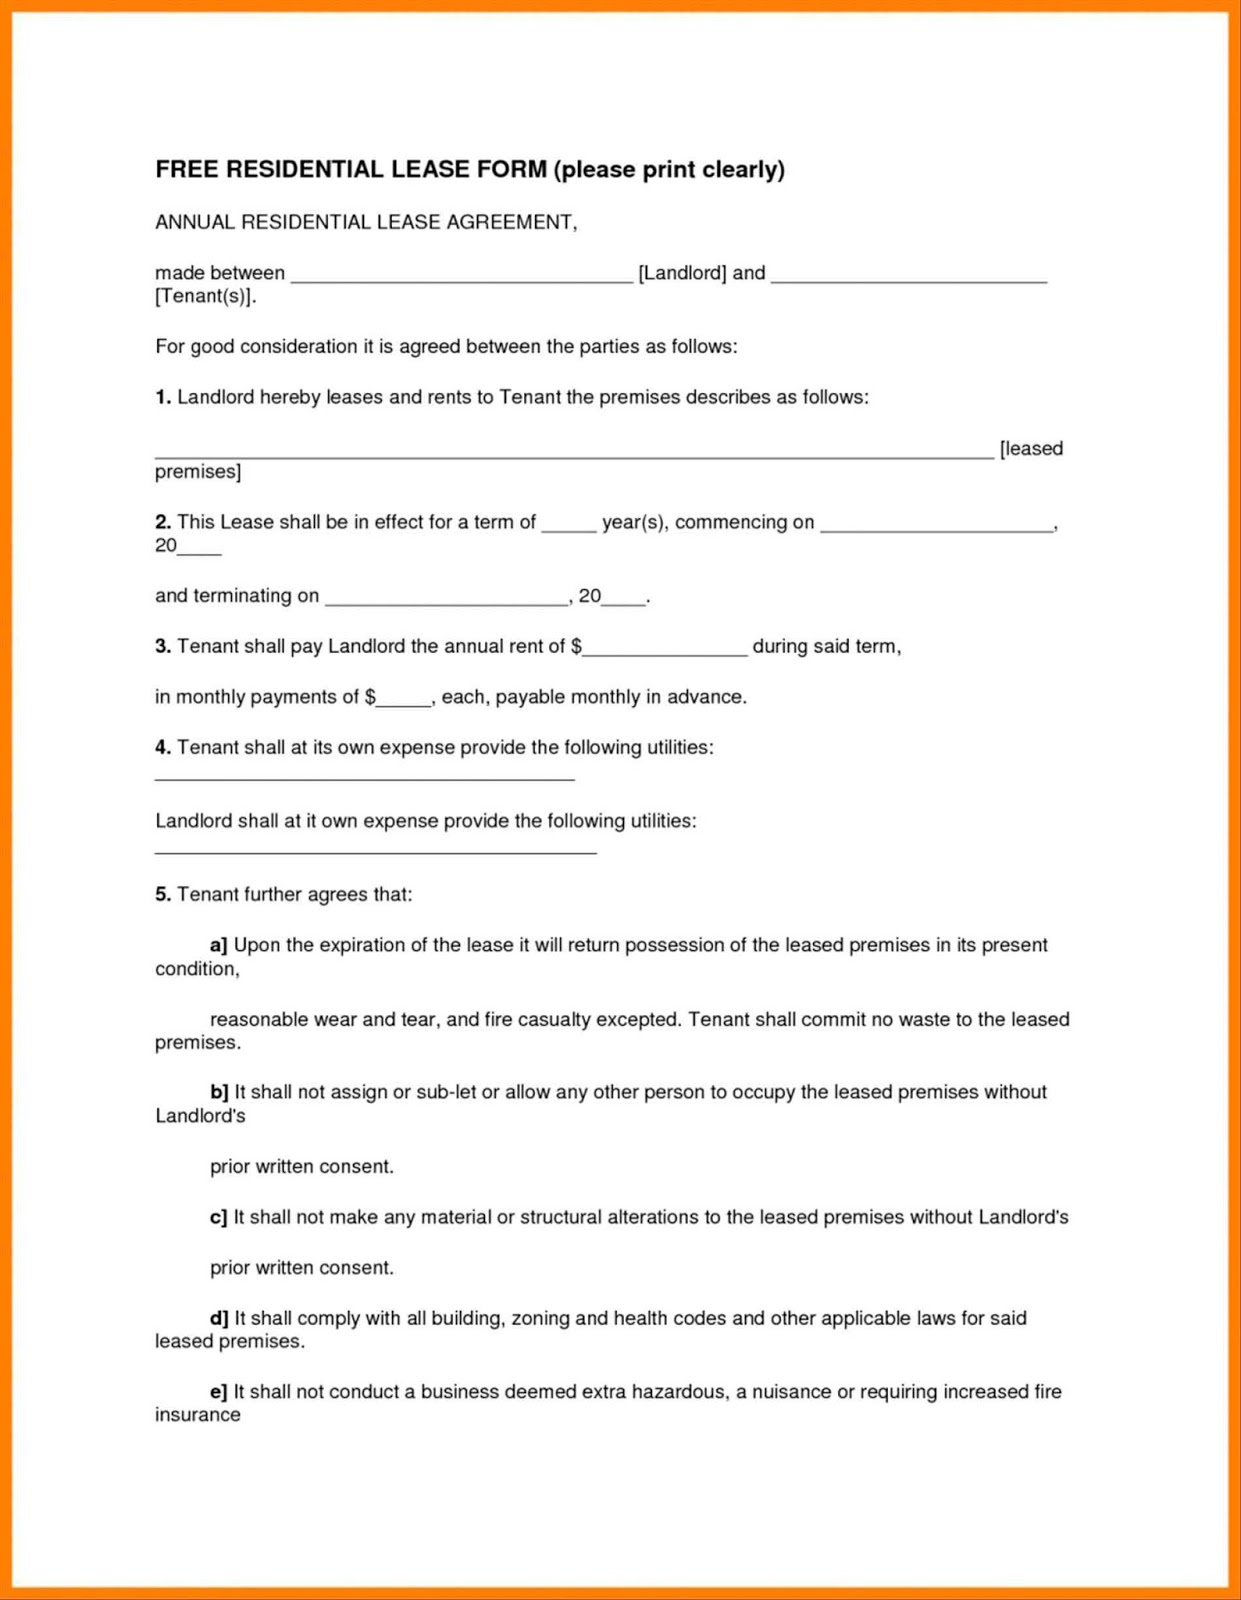 free-printable-lease-agreement-that-are-witty-tristan-website